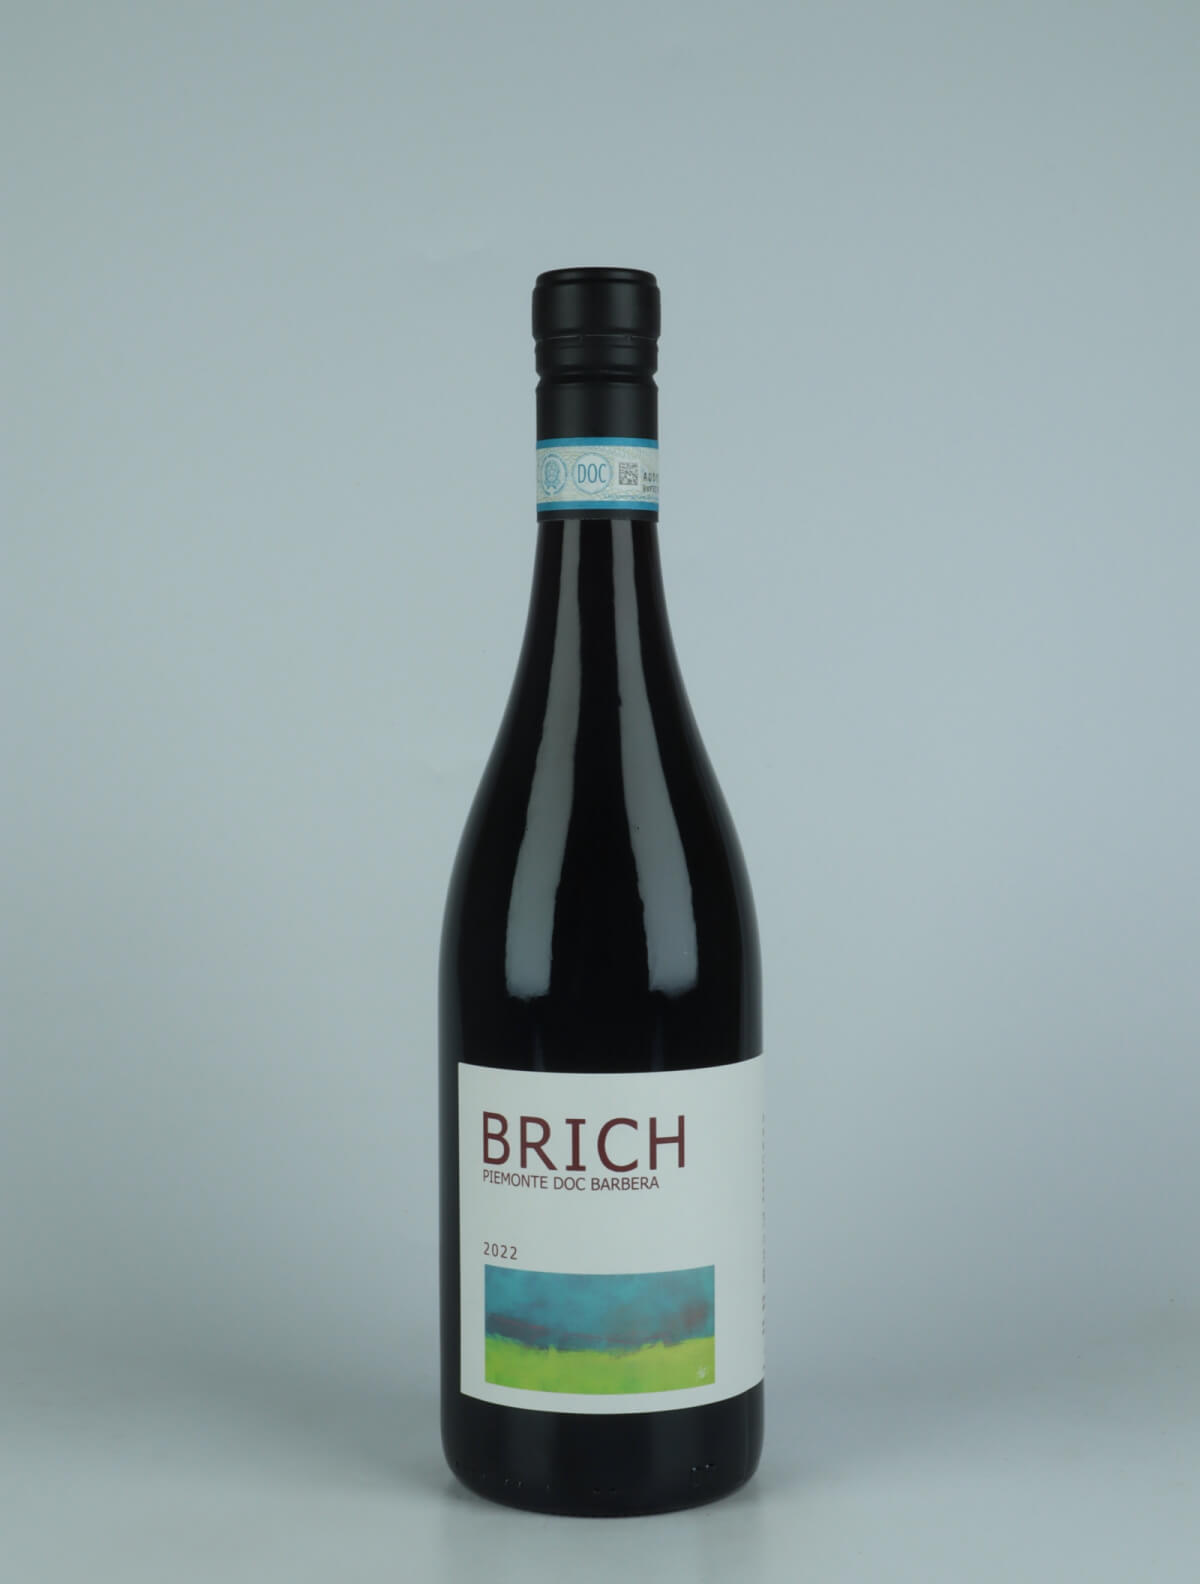 A bottle 2022 Barbera - Brich Red wine from Agricola Gaia, Piedmont in Italy